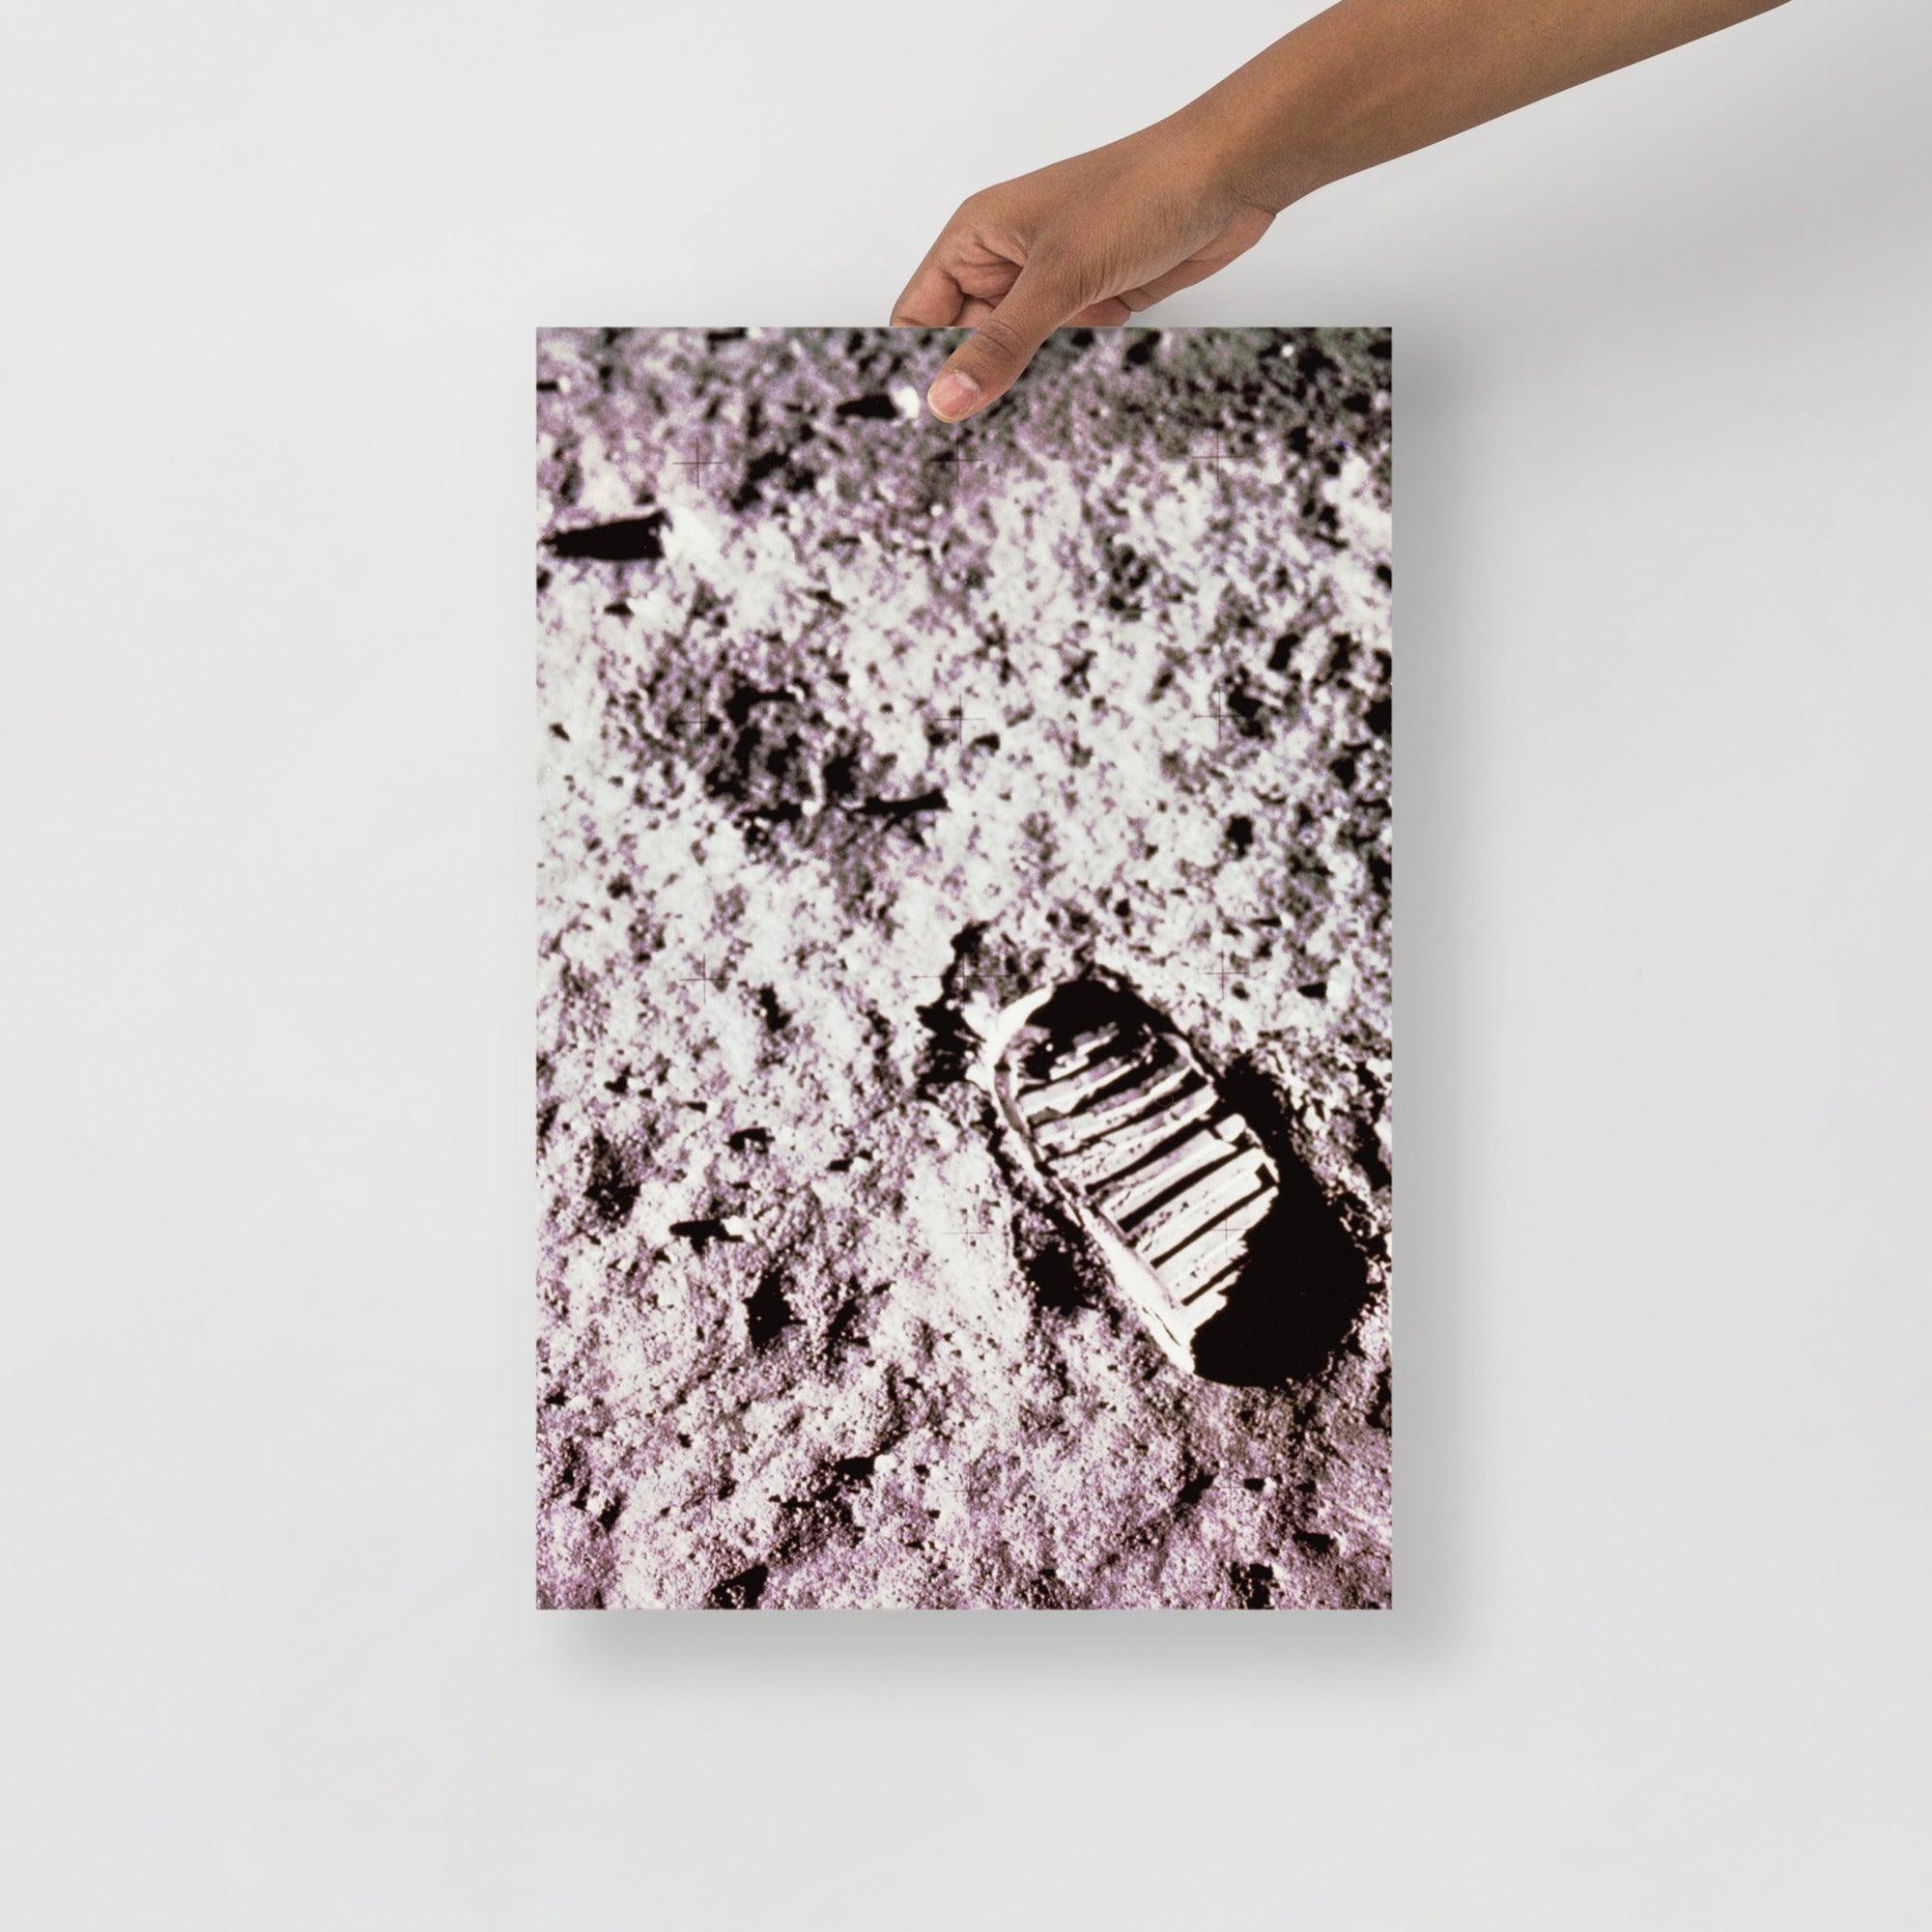 A Footprint on the Moon Apollo 11 poster on a plain backdrop in size 12x18”.